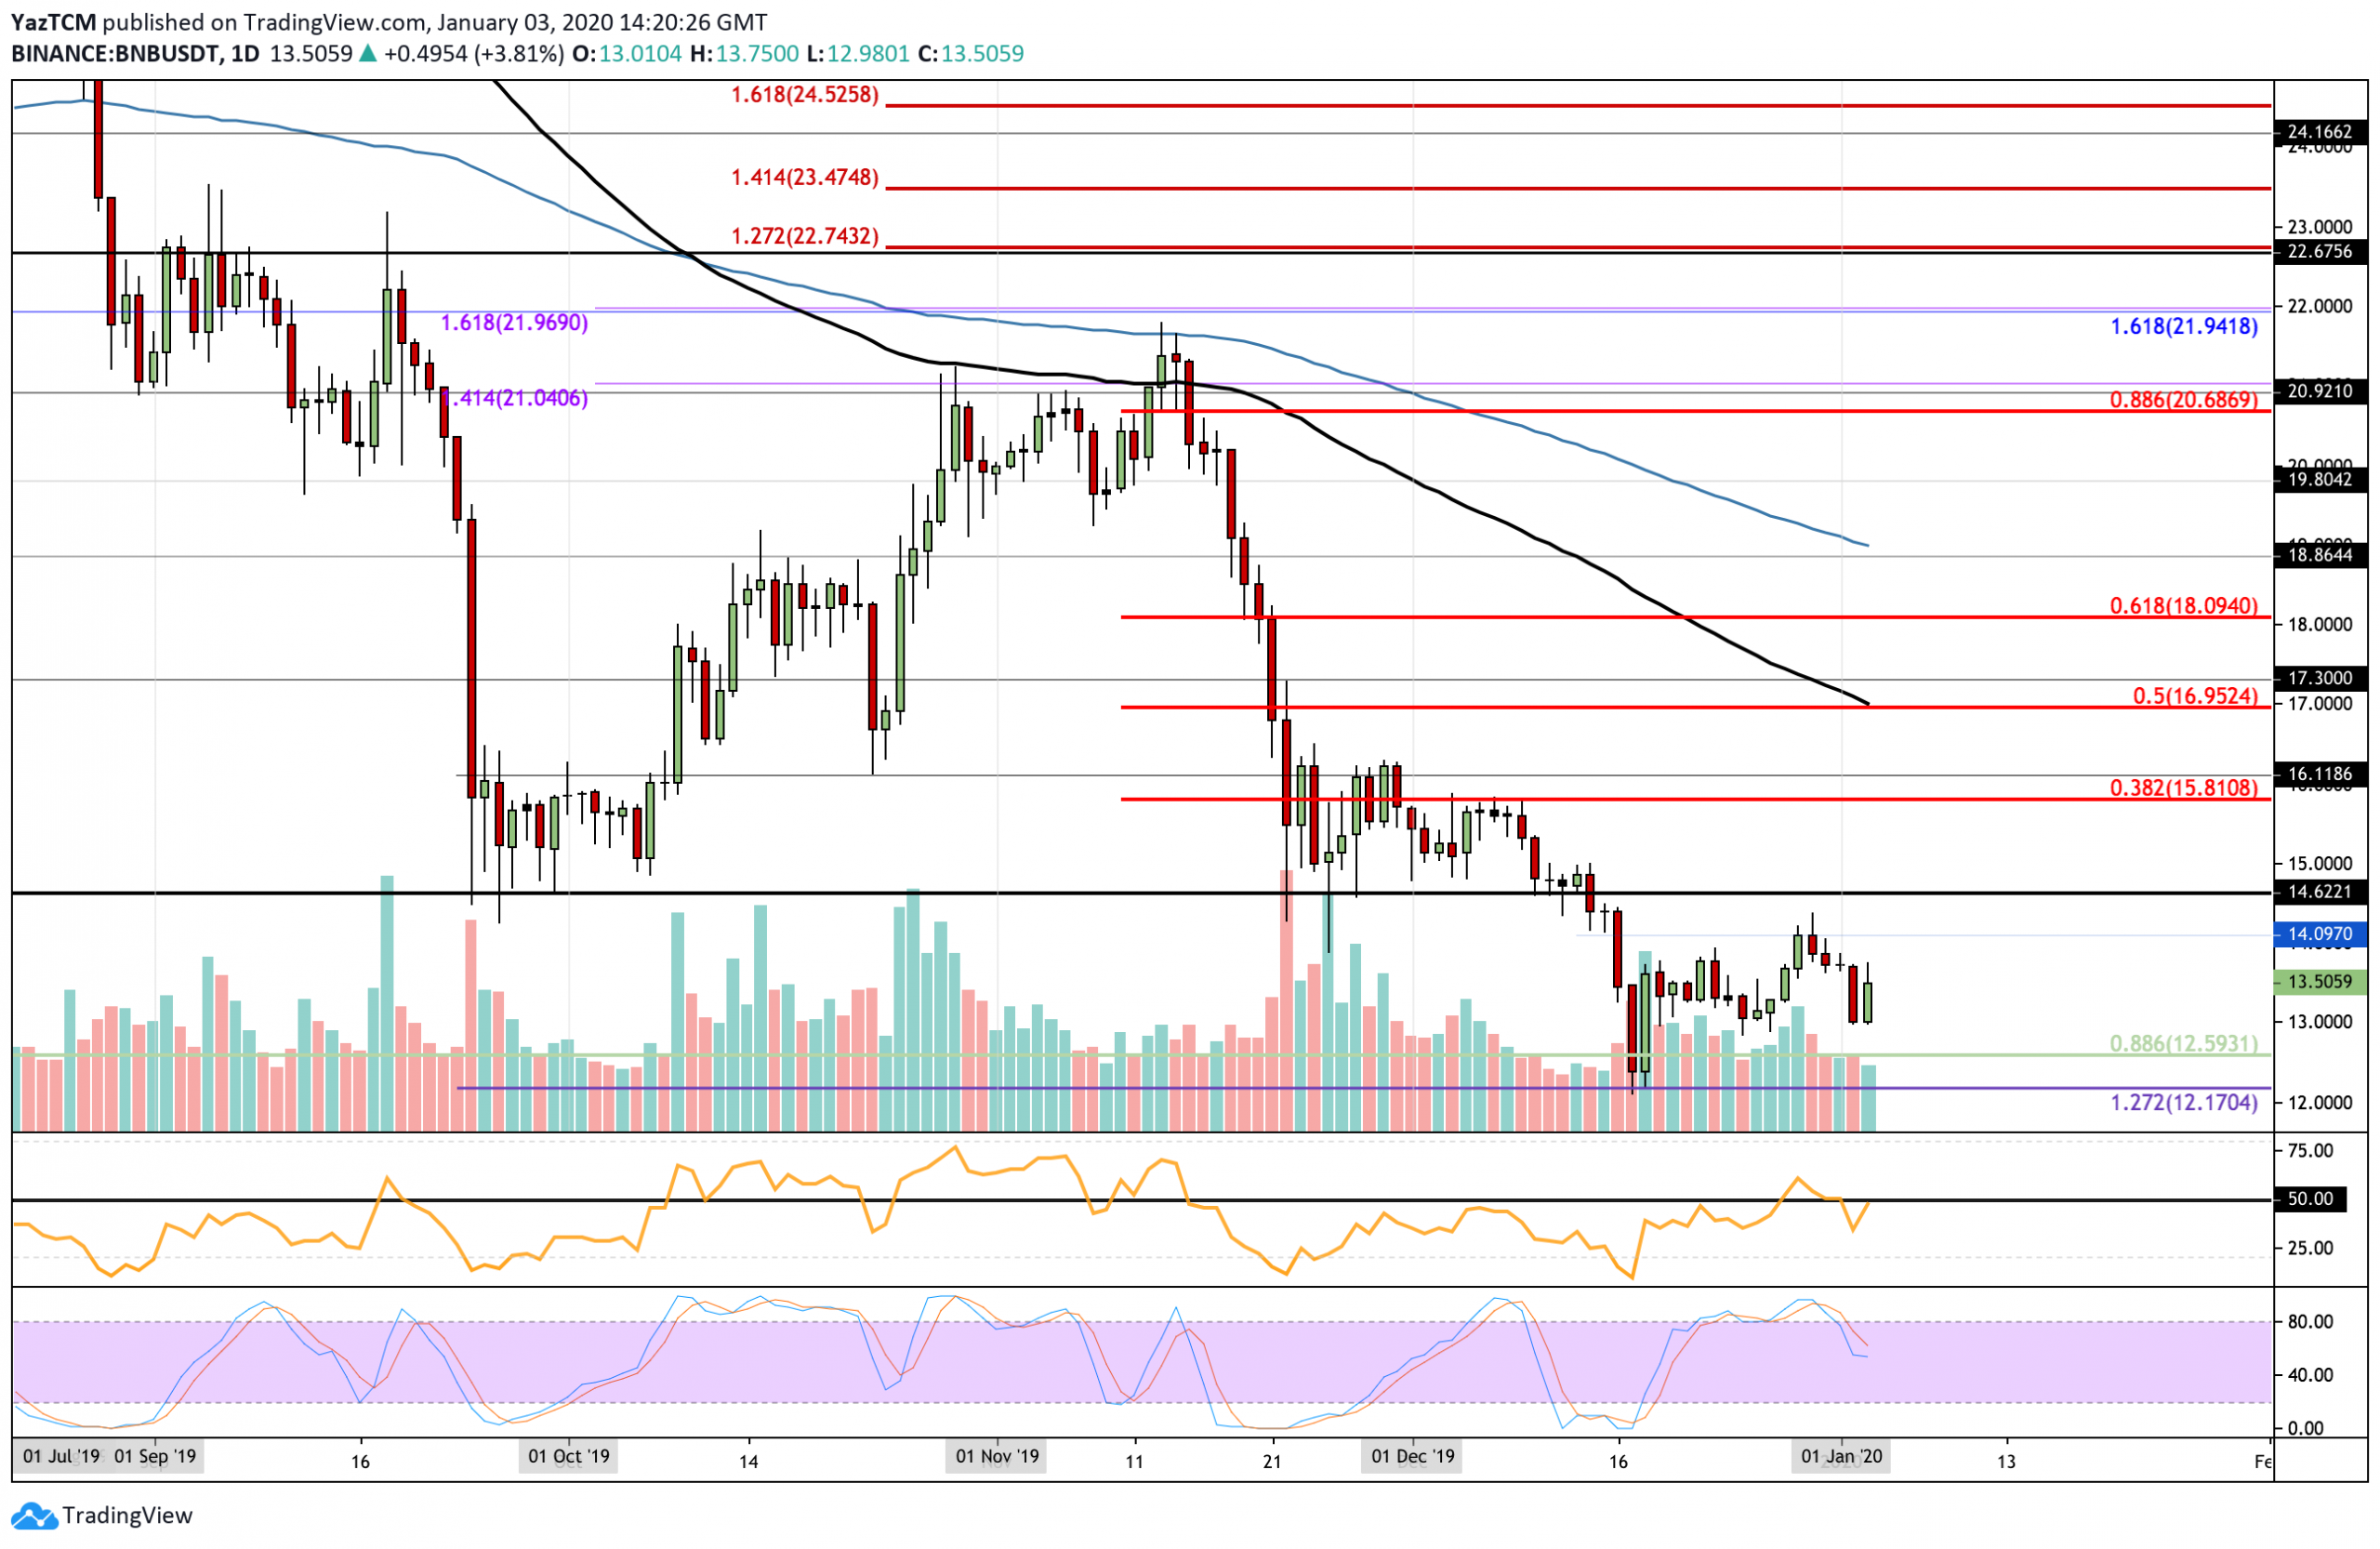 Crypto Price Analysis & Overview January 3rd: Bitcoin, Ethereum, Ripple, Binance Coin, and Monero.